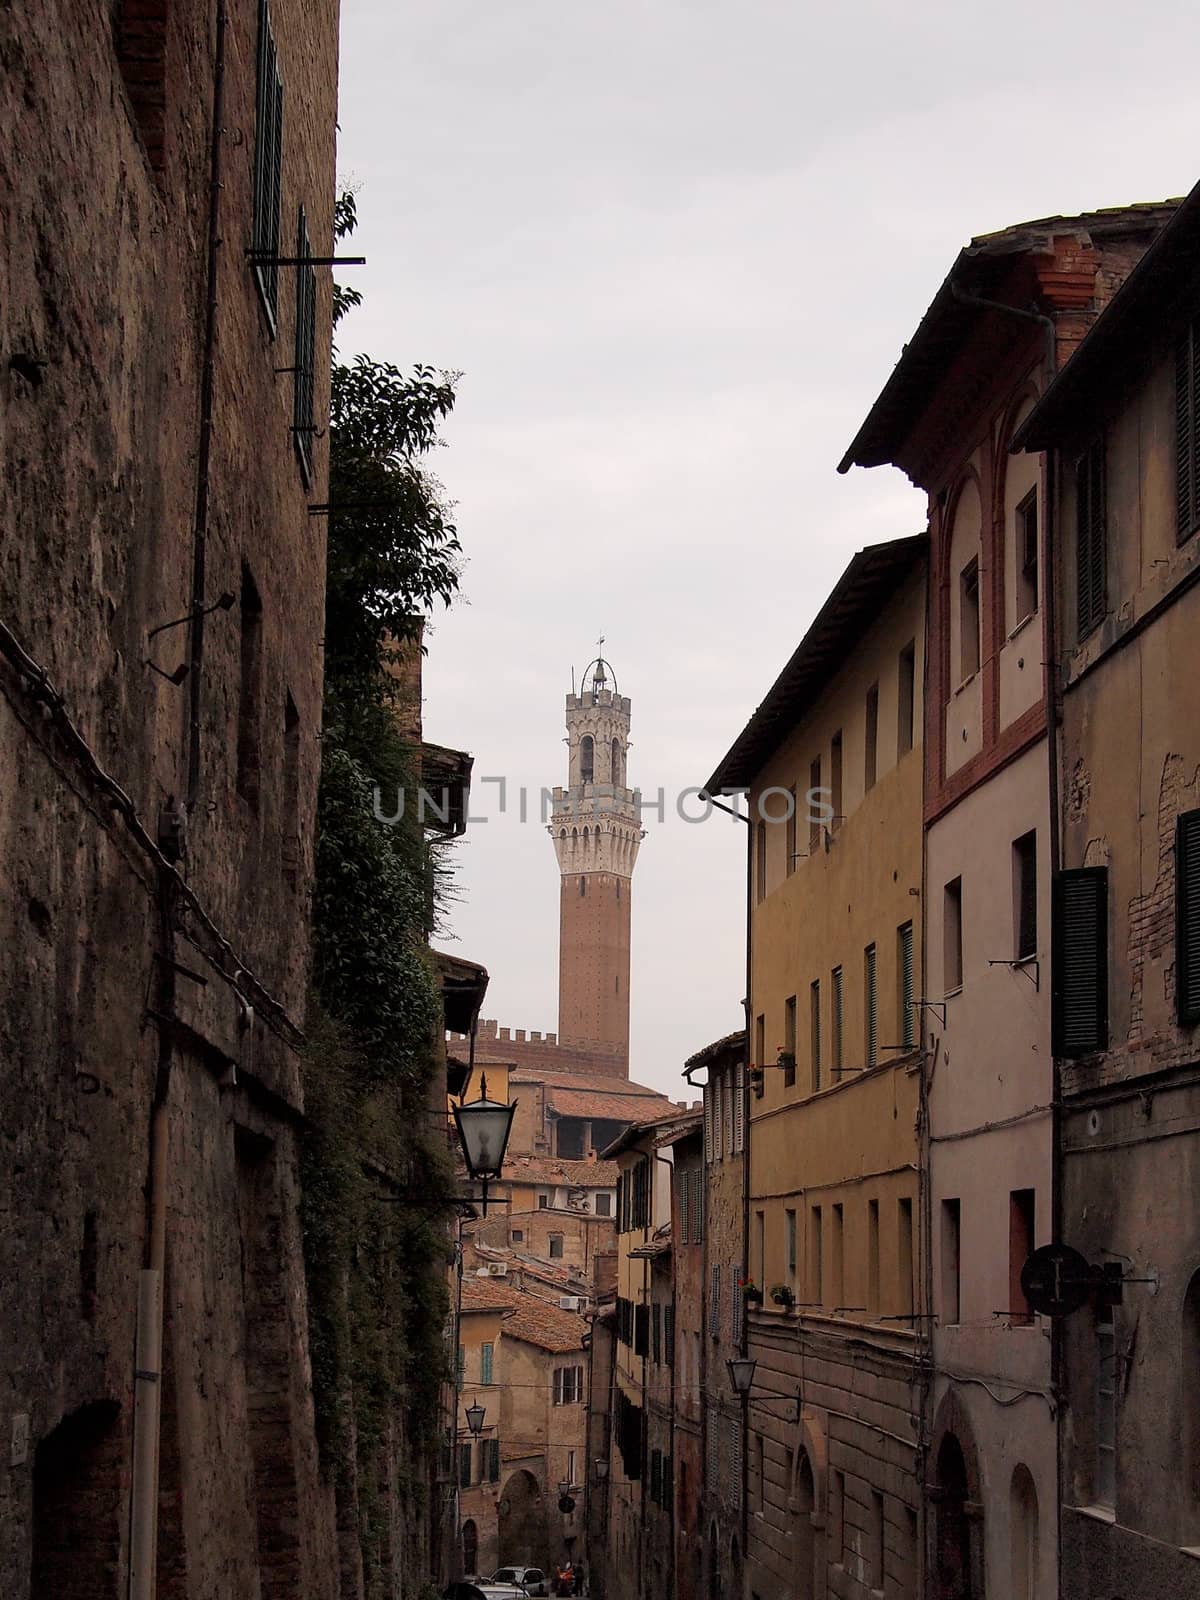 View on the Torre del Mangia from a medieval alley in Siena, Tuscany, Italy.